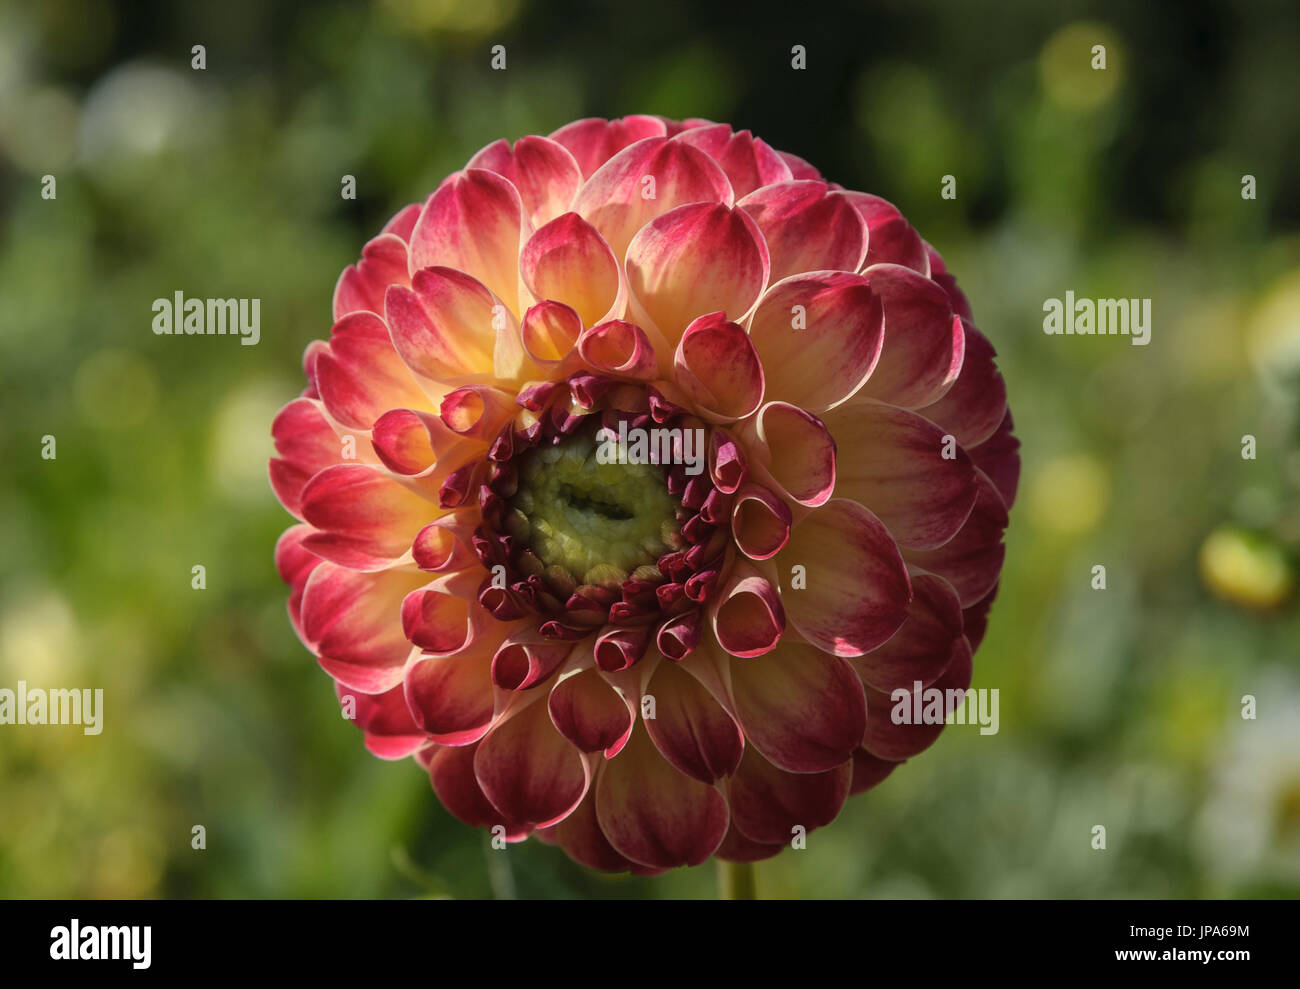 Natural Science, Small depth of sharpness, dahlia flower close-up, Stock Photo